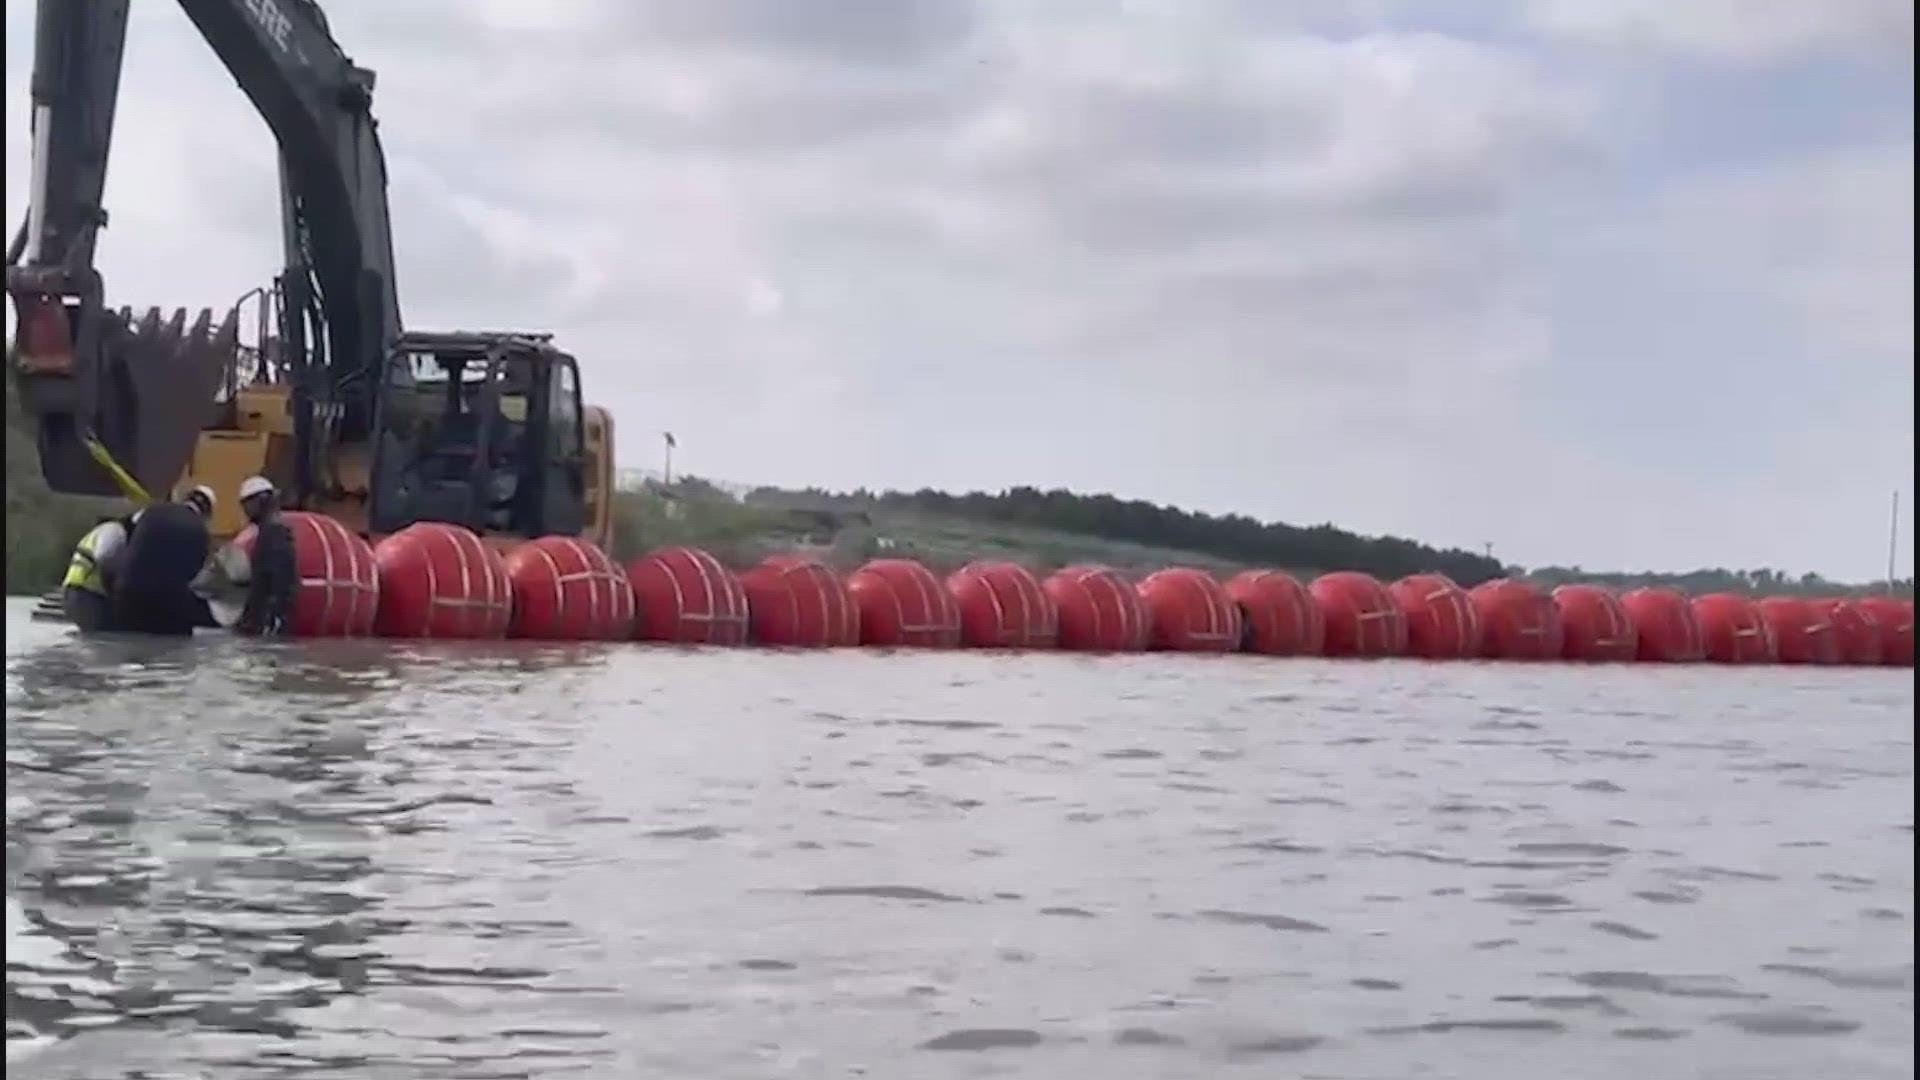 The Mexican government plans to send an inspection team to see if Texas’ buoys have crossed into Mexico’s side of the border.